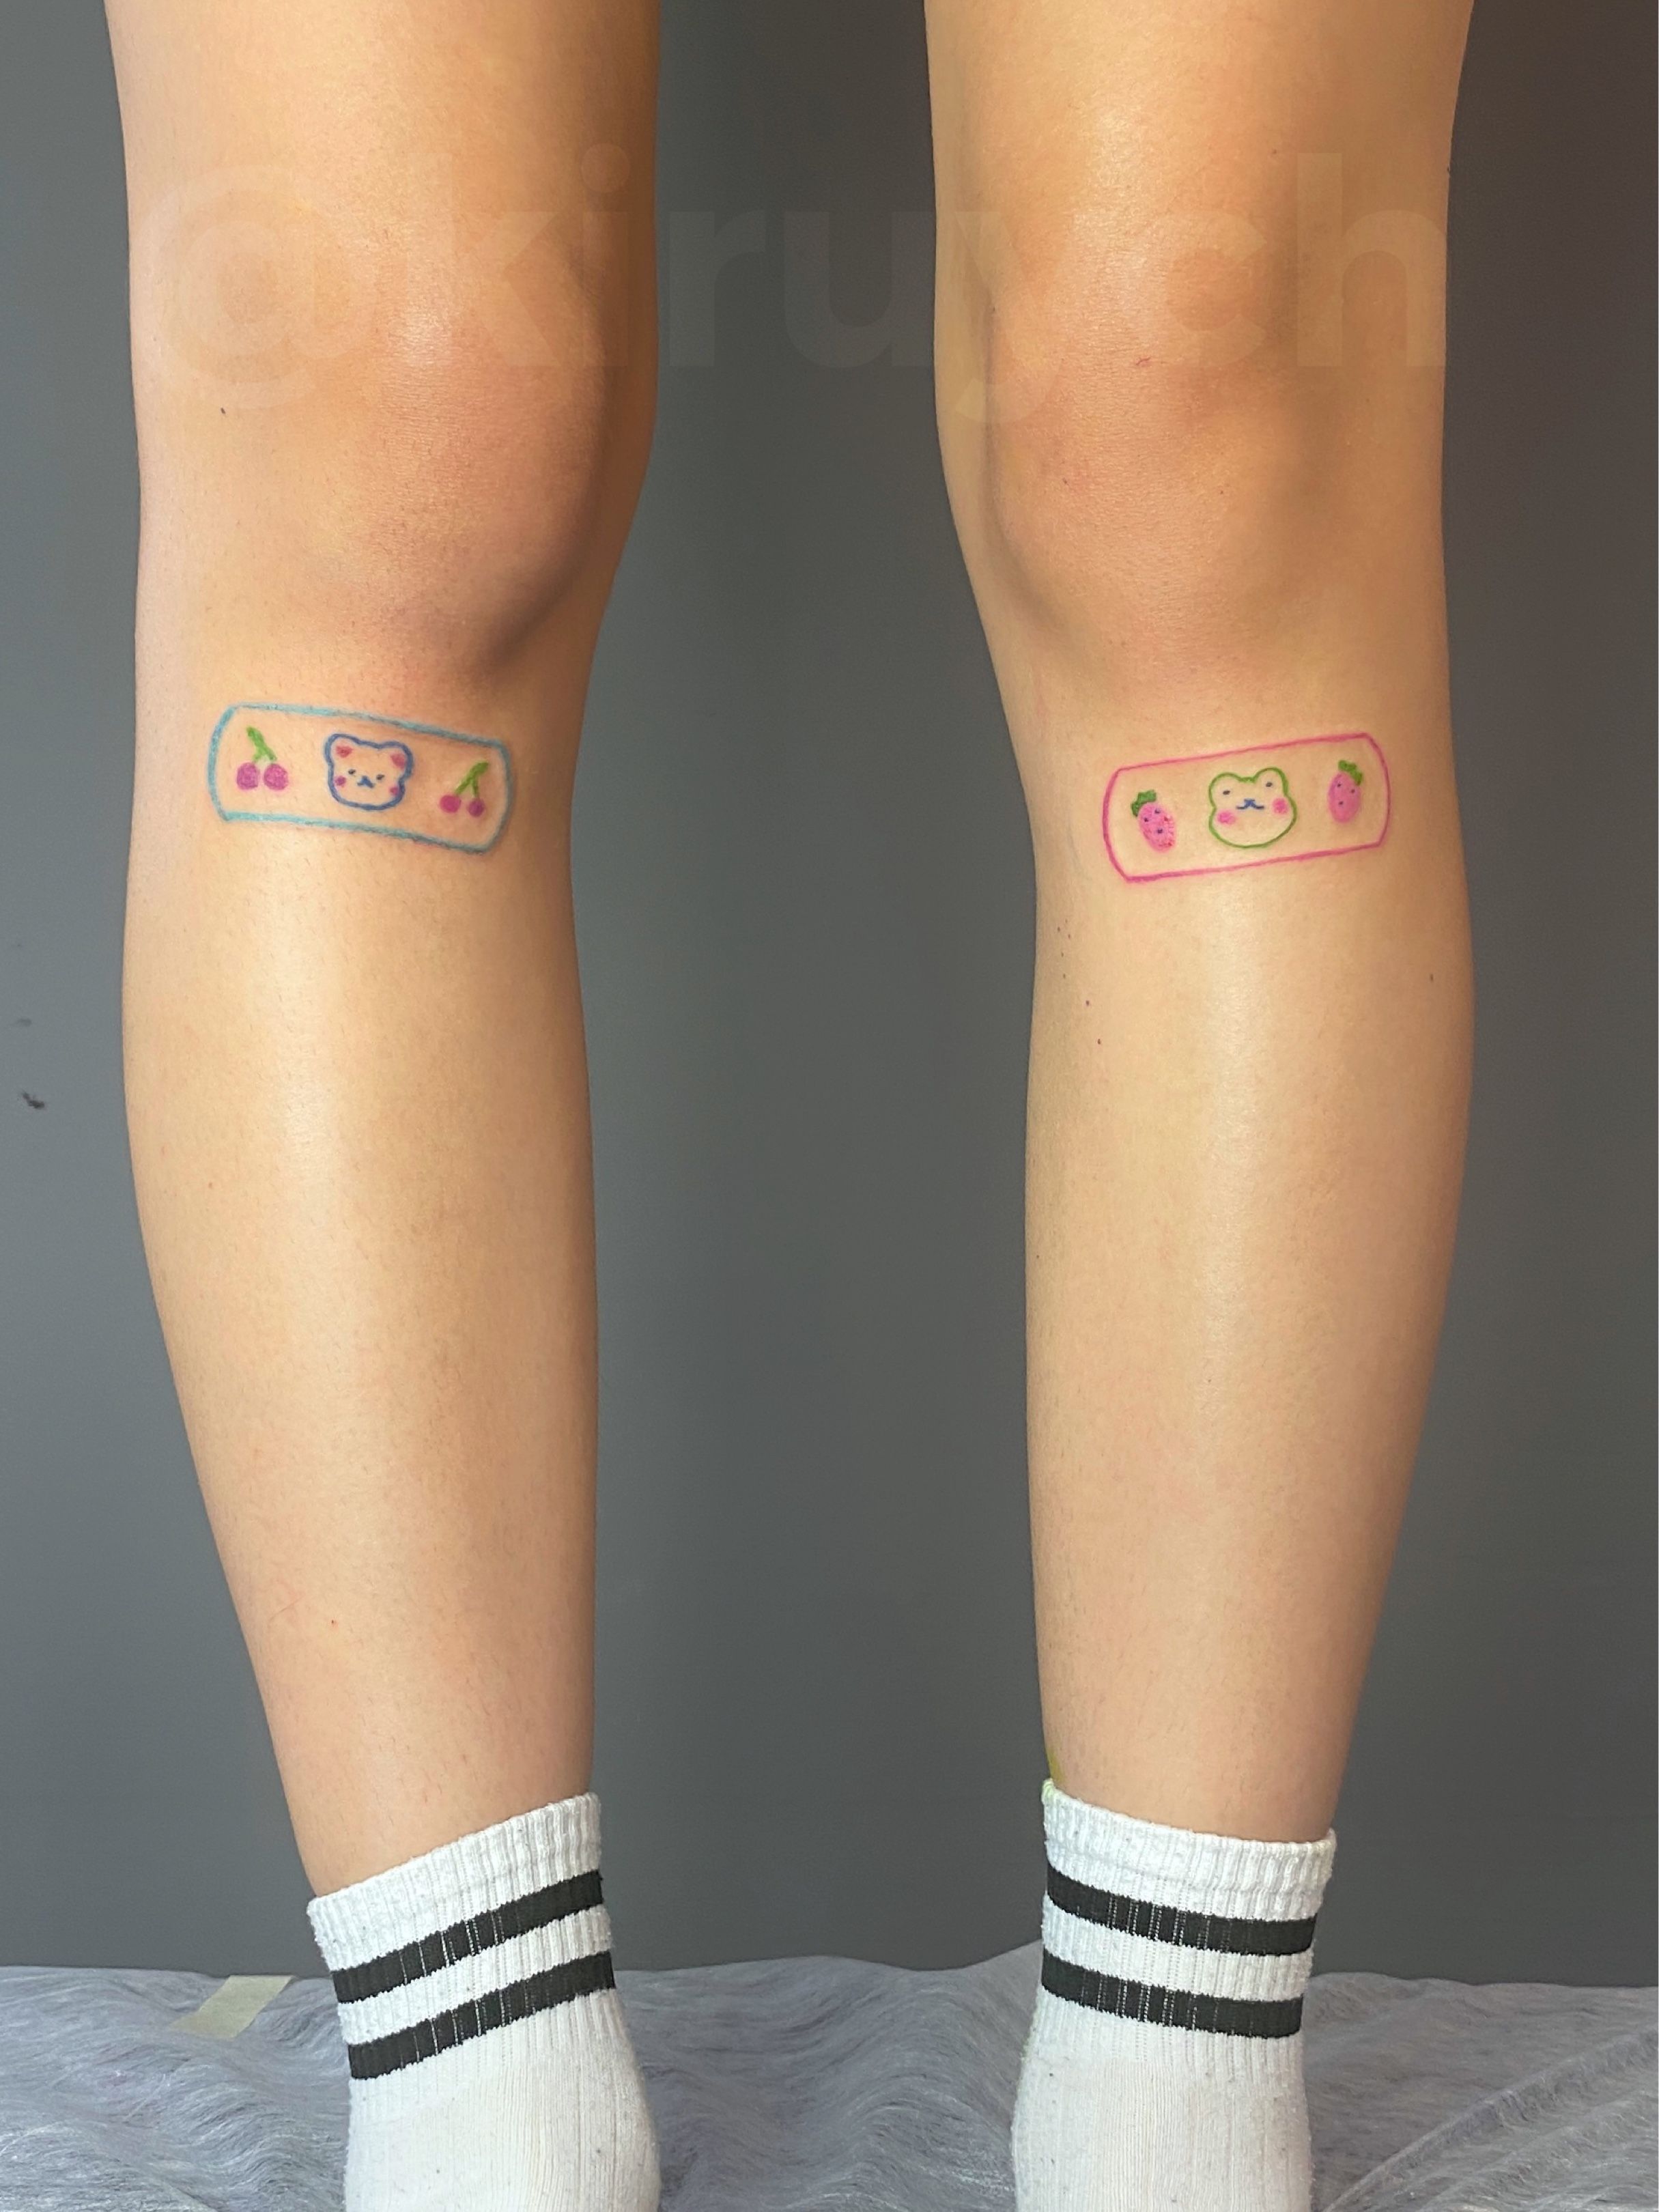 What Kind of Bandage is Best for a New Tattoo? – DrySee